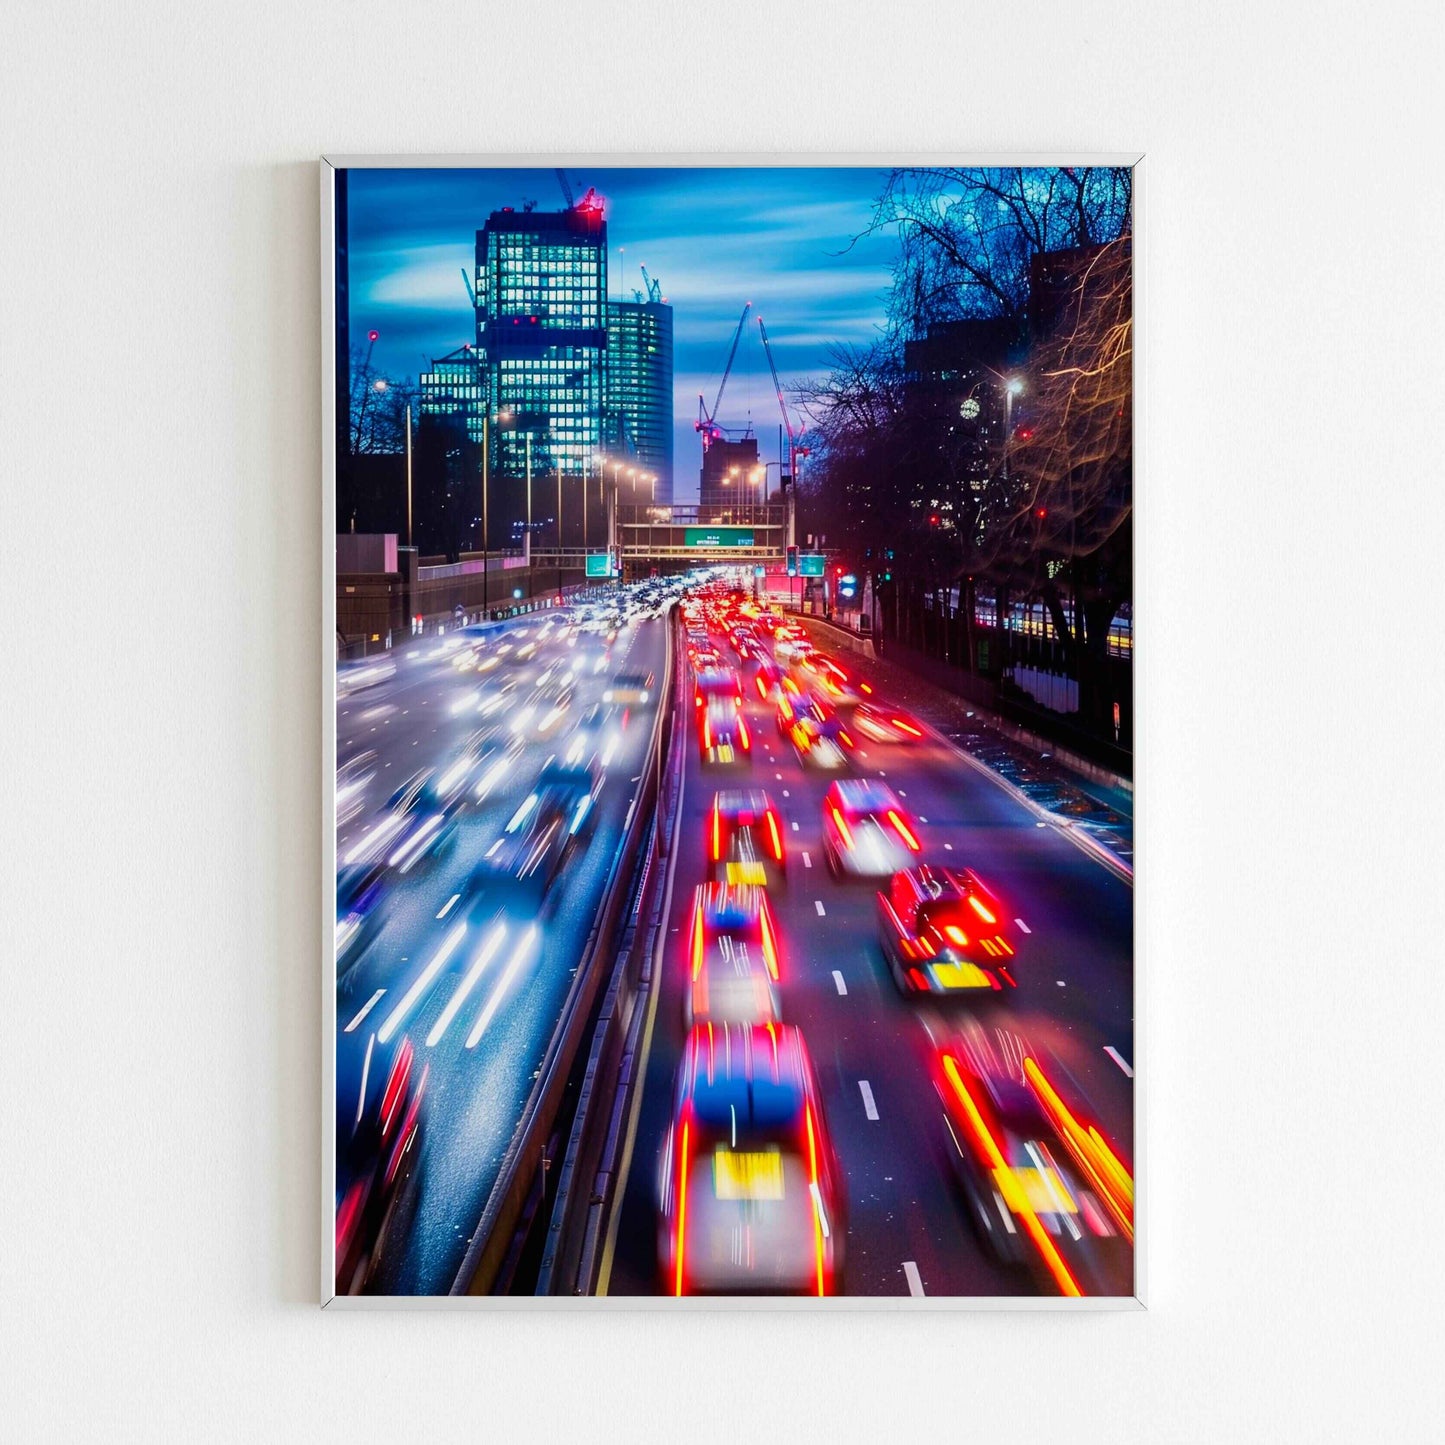 Capture the feeling of city motion with the first part of Blurred Cars (physical or digital).